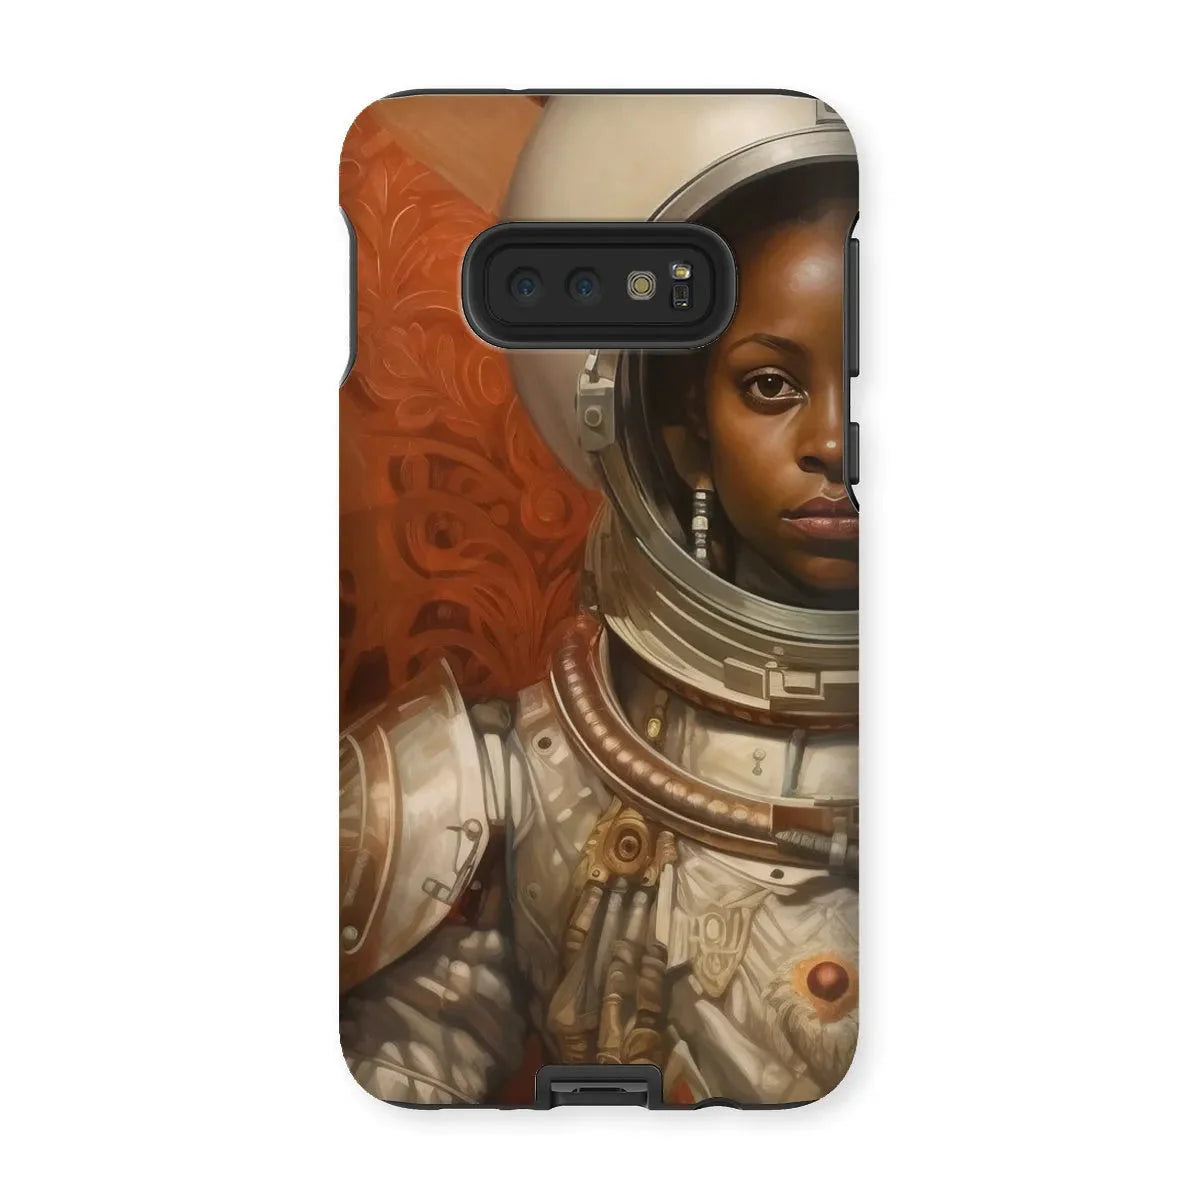 Ava The Lesbian Astronaut - Sapphic Aesthetic Phone Case - Samsung Galaxy S10e / Matte - Mobile Phone Cases - Aesthetic